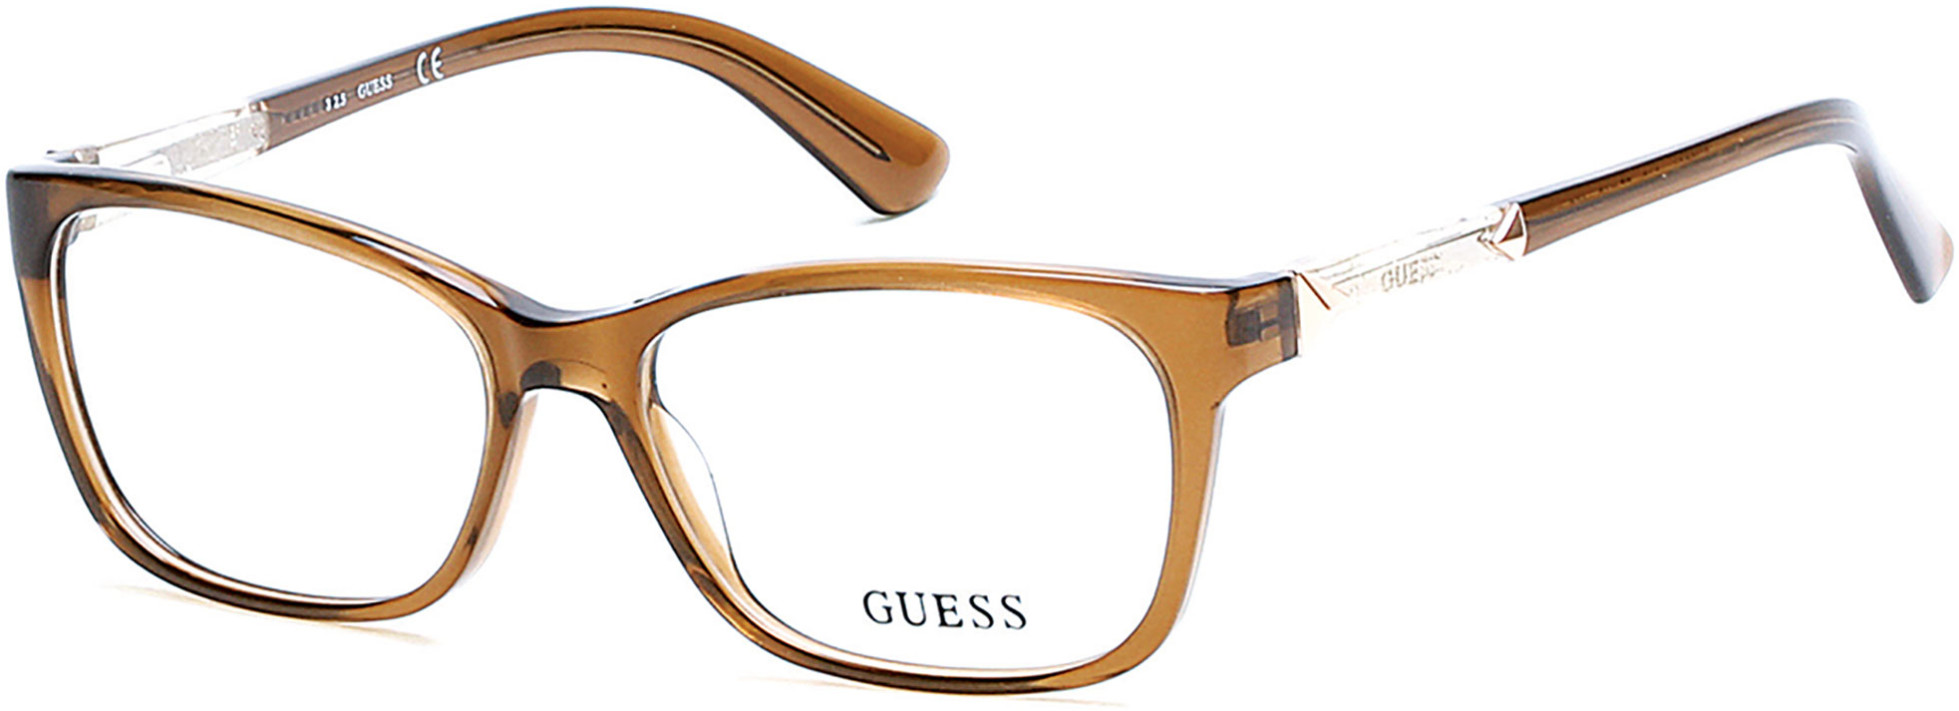 GUESS 2561 045